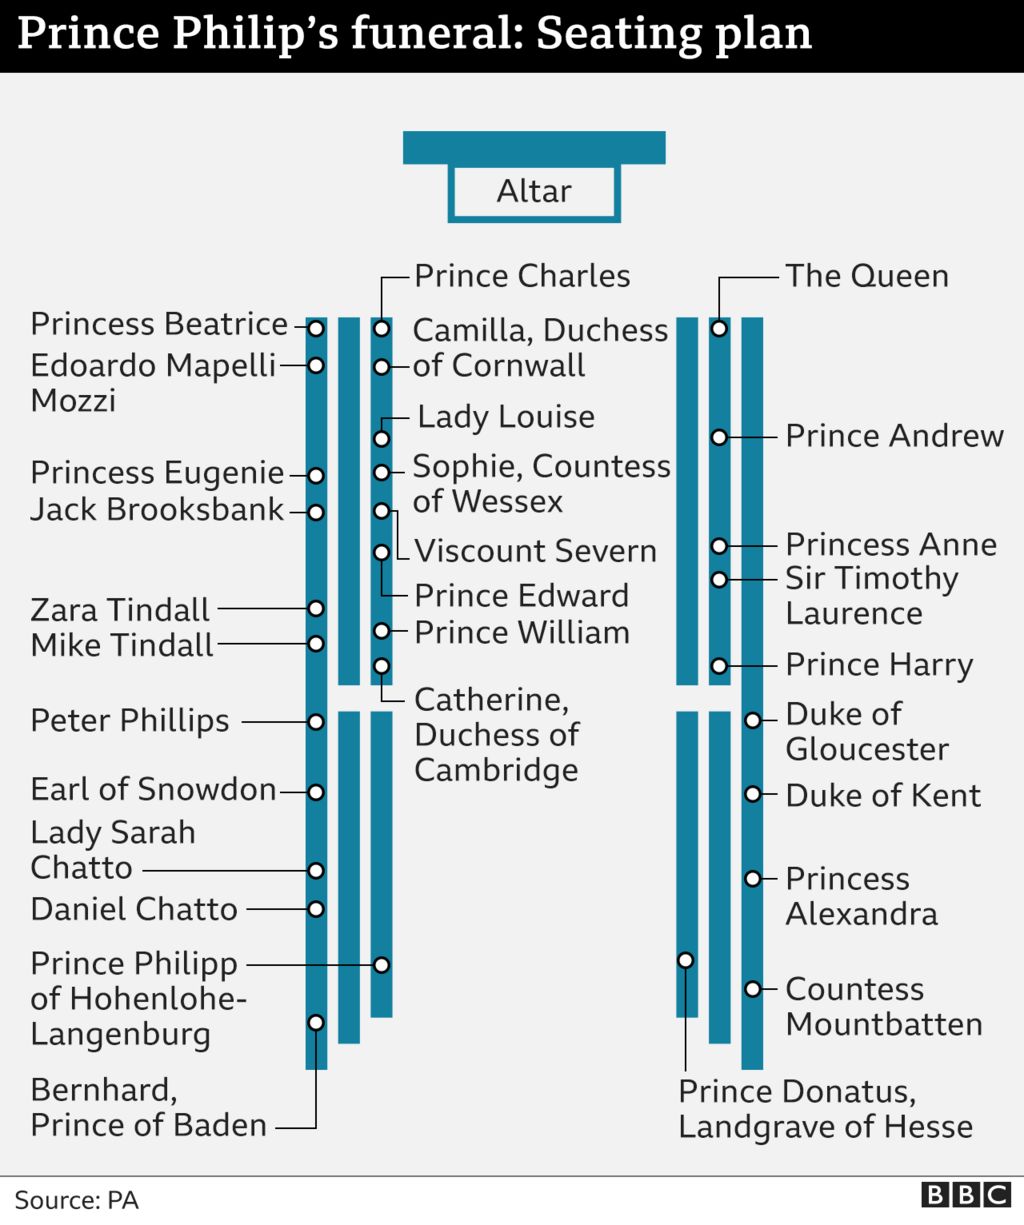 The seating plan at Prince Philip's funeral